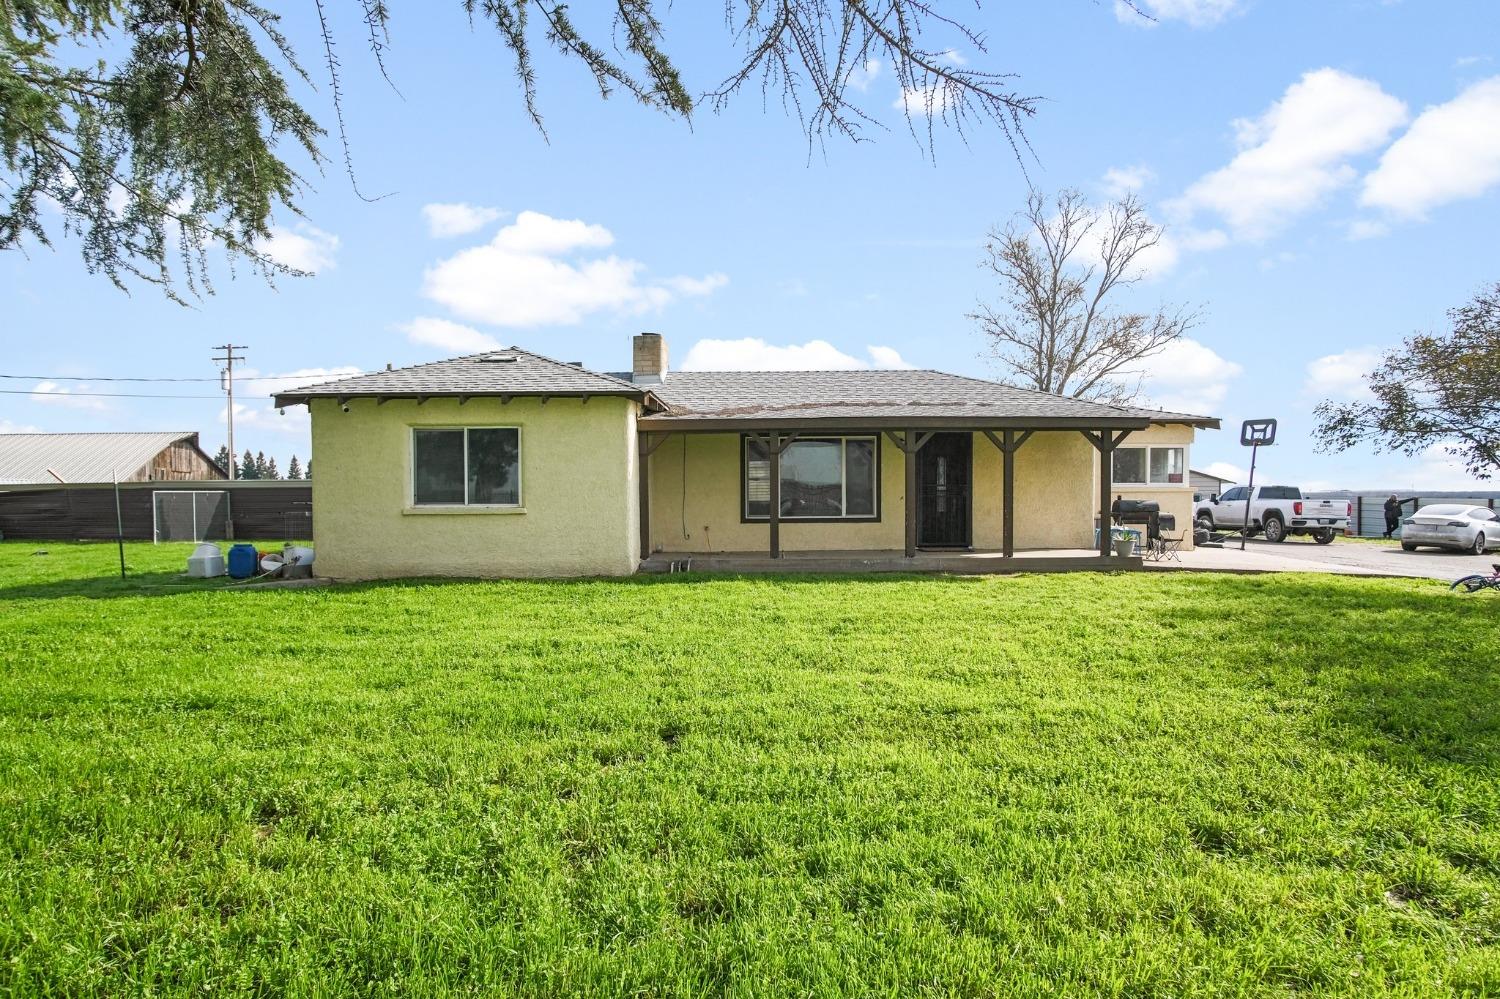 Photo of 1654 Hickman Rd in Hickman, CA